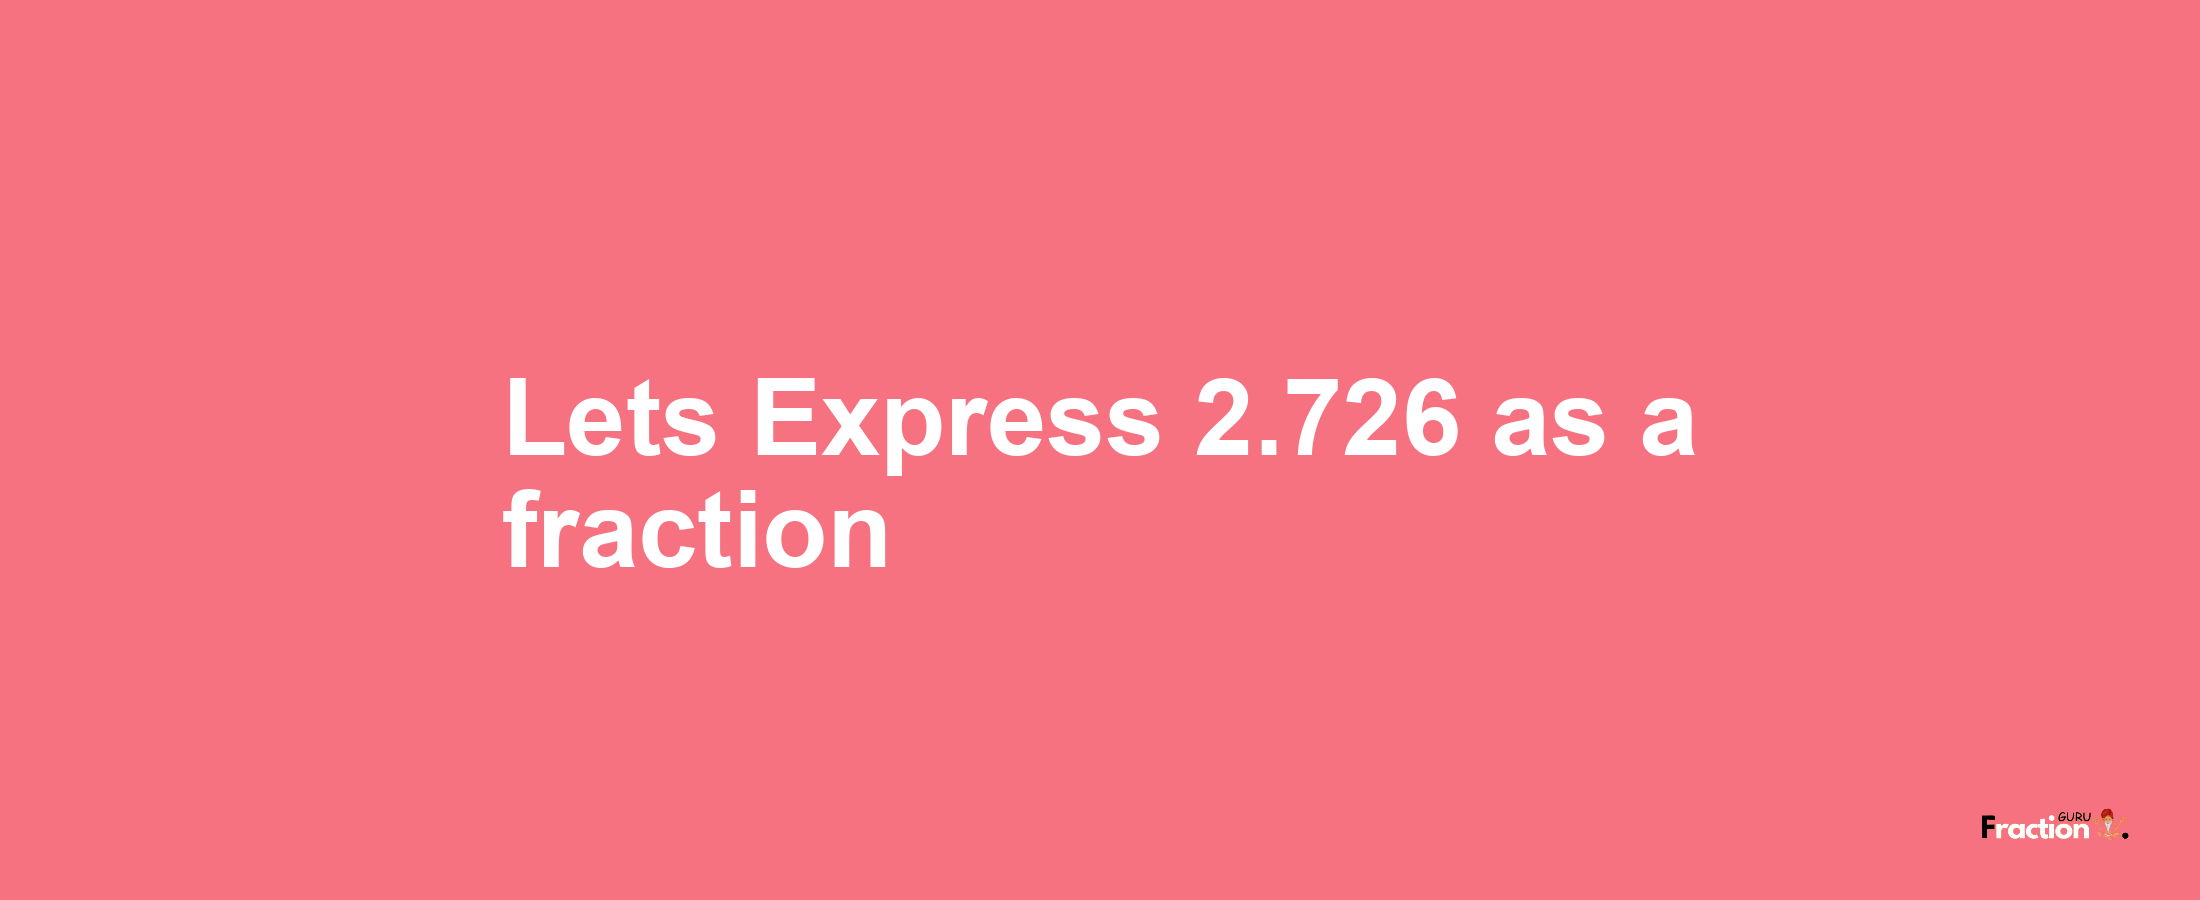 Lets Express 2.726 as afraction